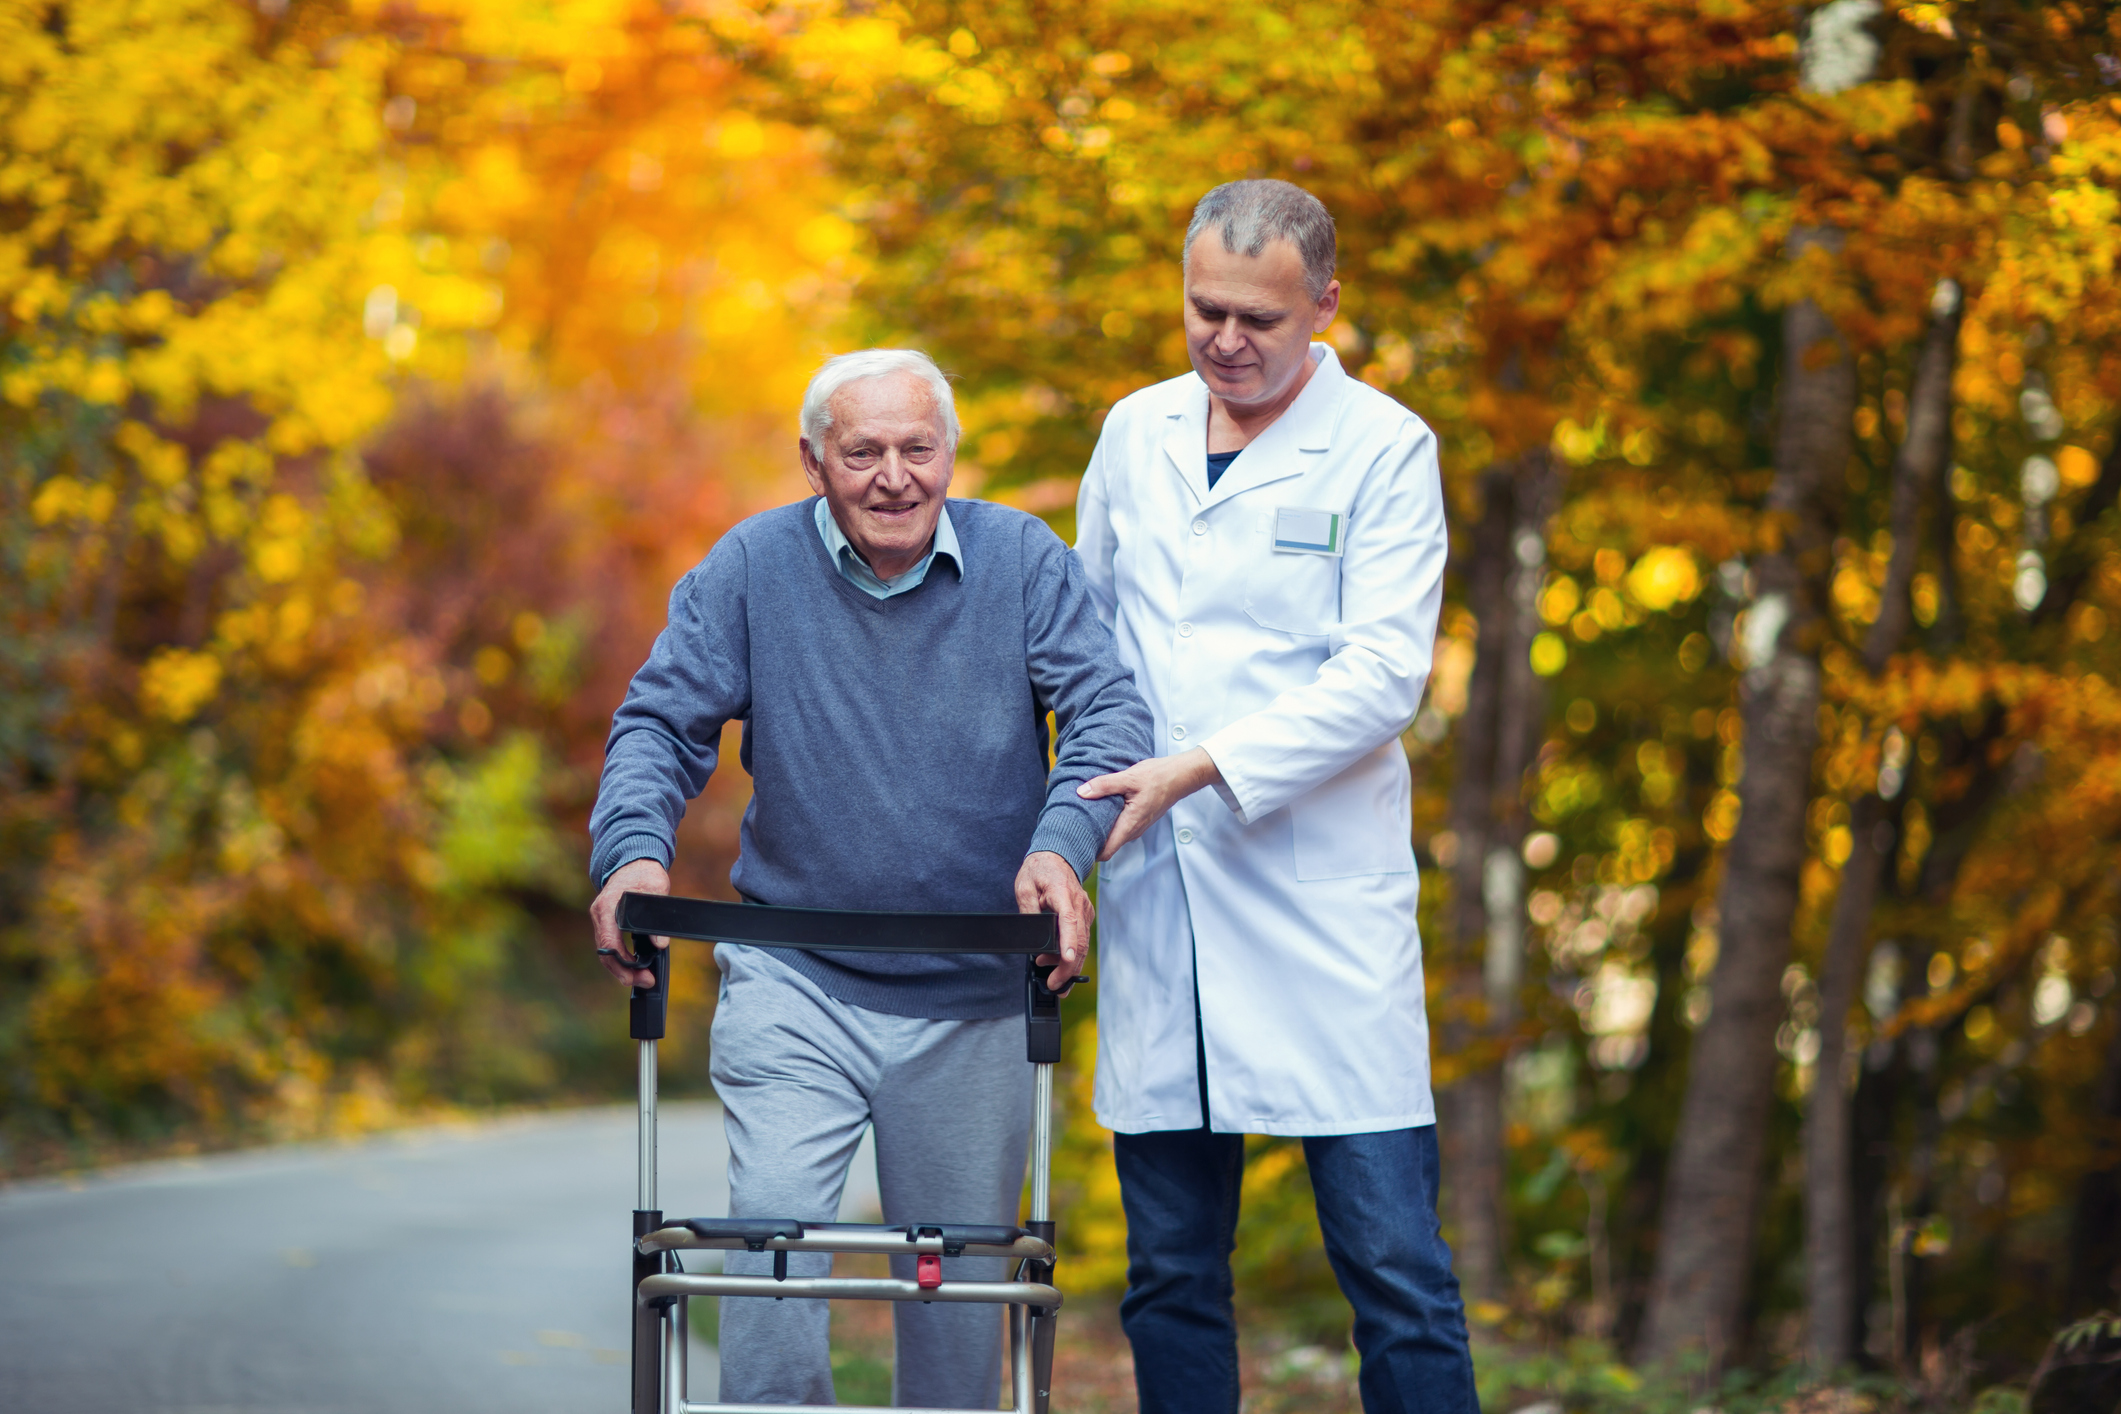 Male nurse assisting senior patient with walker outdoor